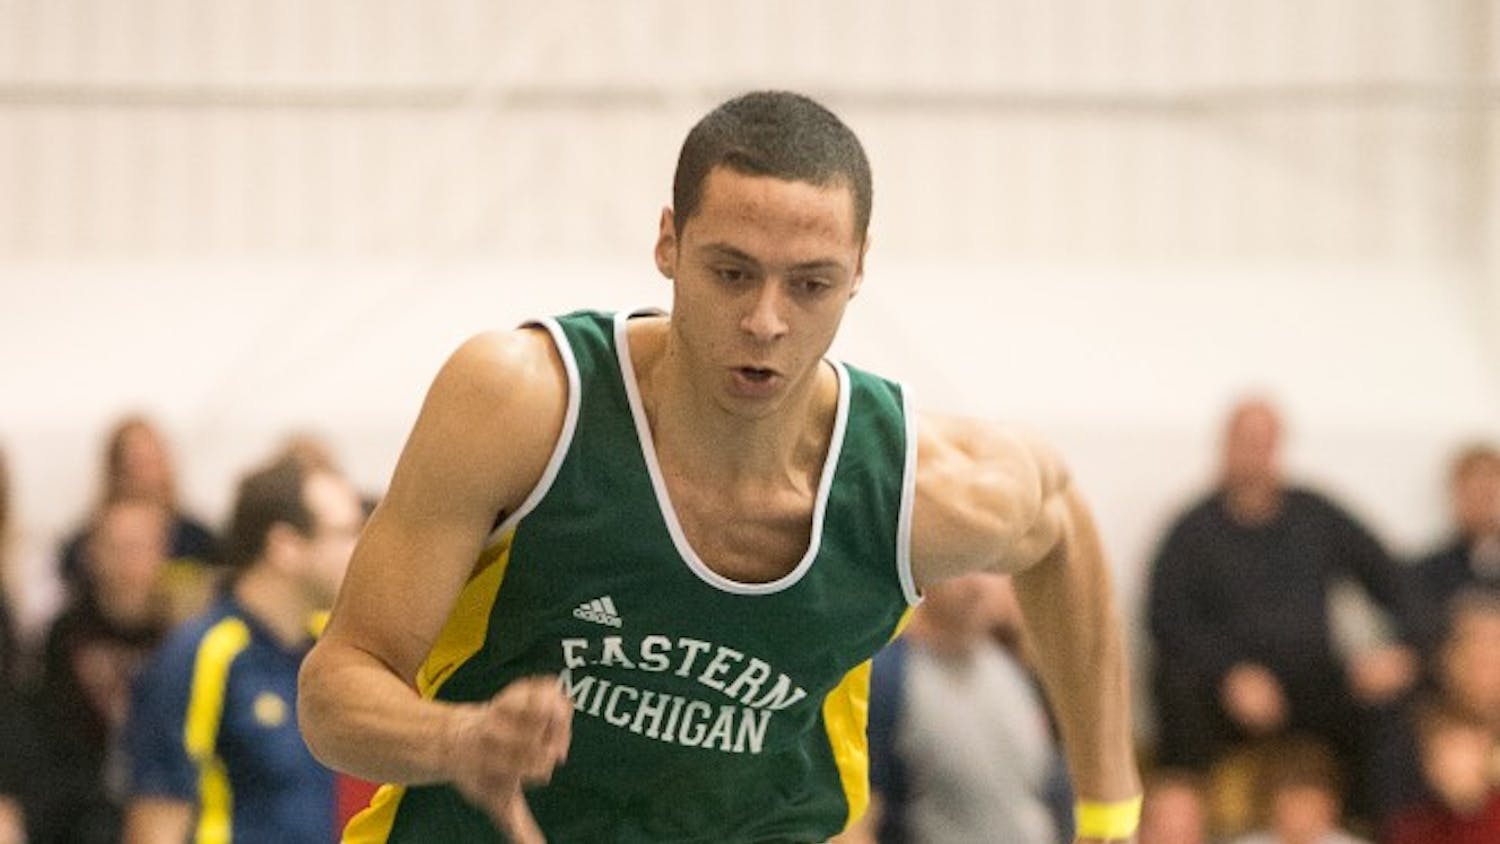 Eastern Michigan sprinter Tyler Brown fires off with the gun to start the 400m dash on 18 January at the Simmons-Harvey Invitational in Ann Arbor.